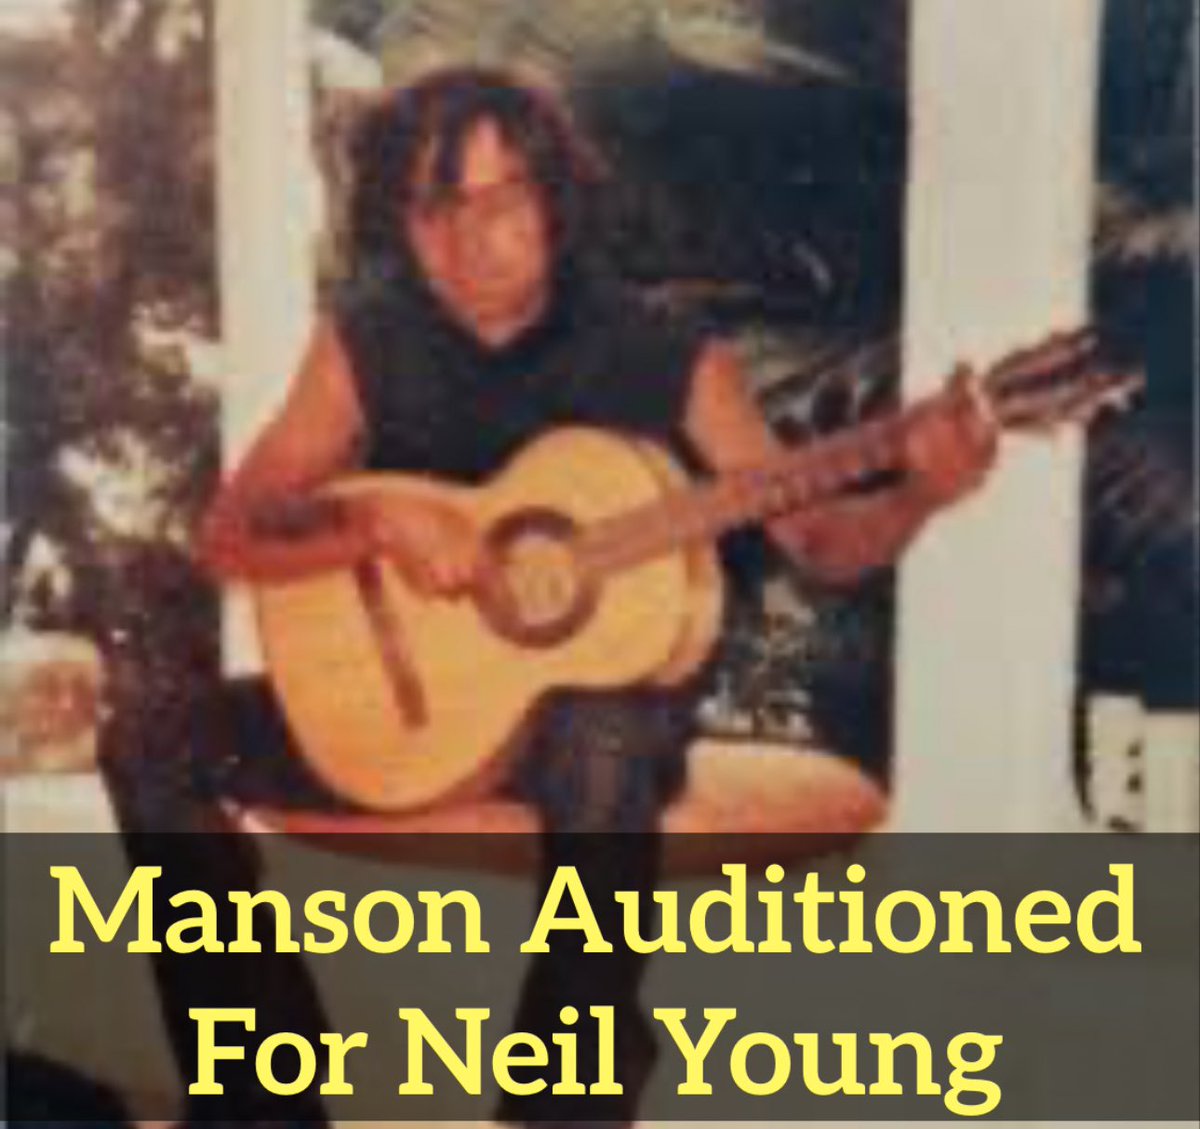 Manson recorded with the Beach Boys, and auditioned with Neil Young.